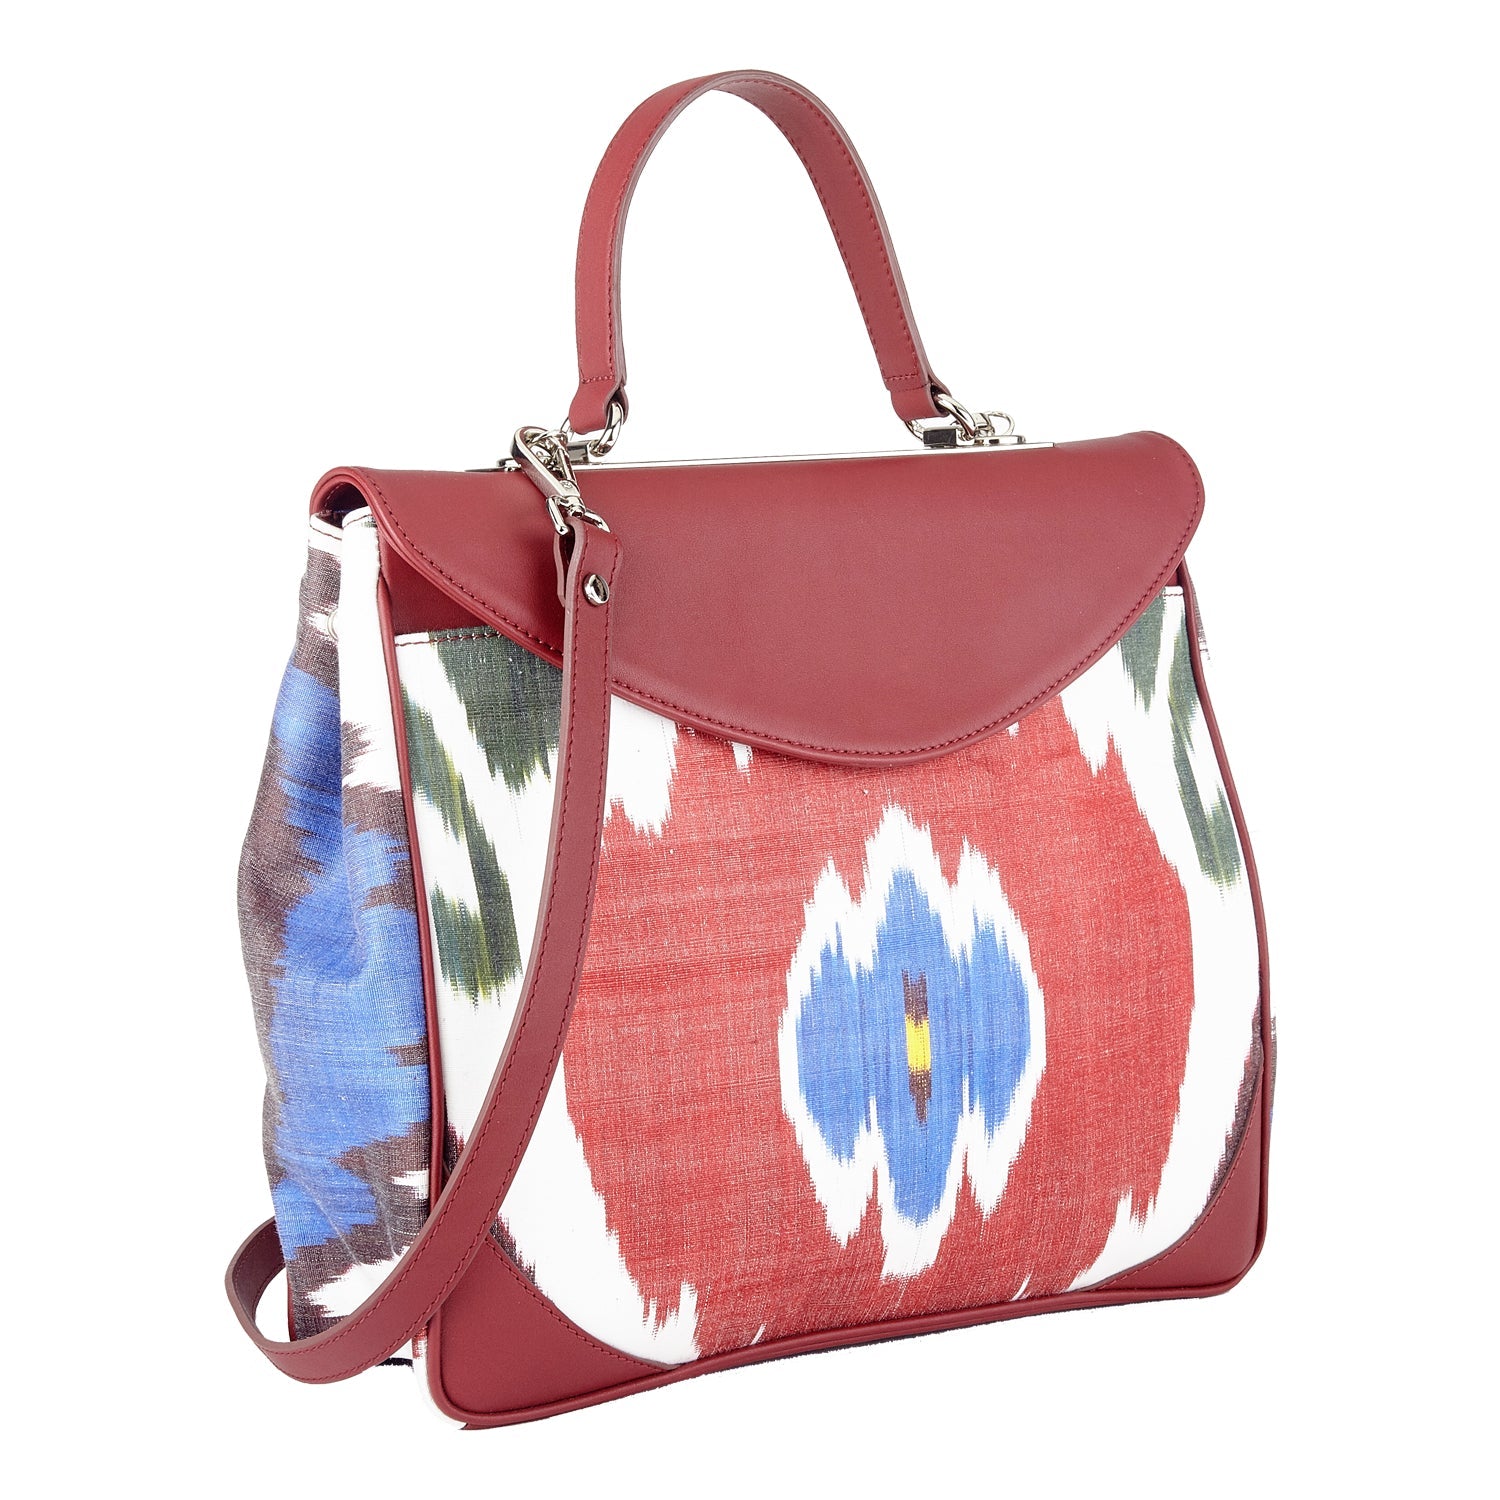 Acacia Sustainable Handmade Leather and Ikat Floral Tote Bag in Burgundy - SJW BAGS LONDON